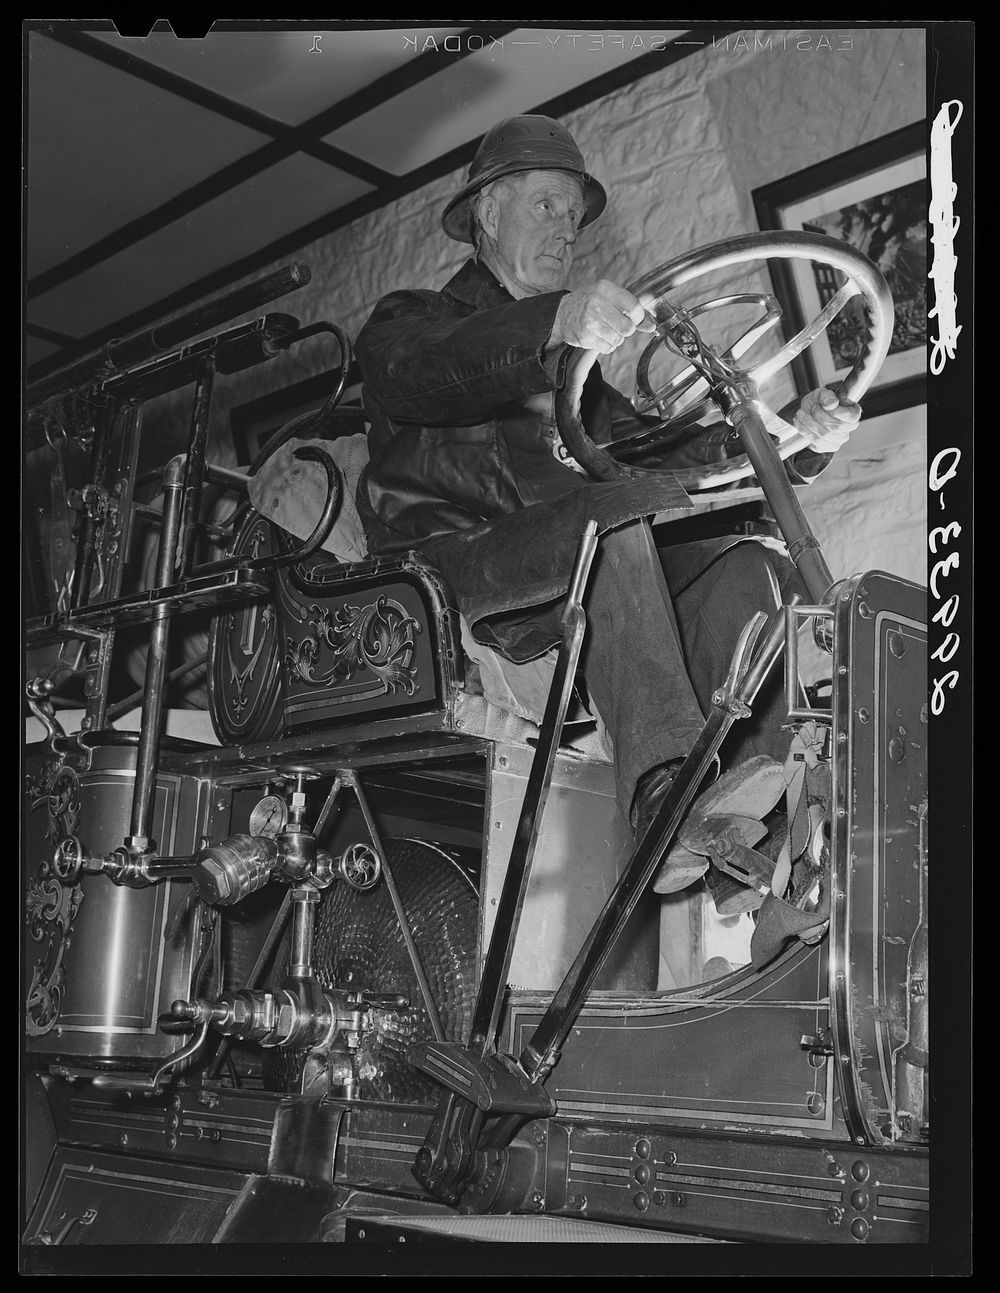 Fireman. Carson City, Nevada. Sourced from the Library of Congress.